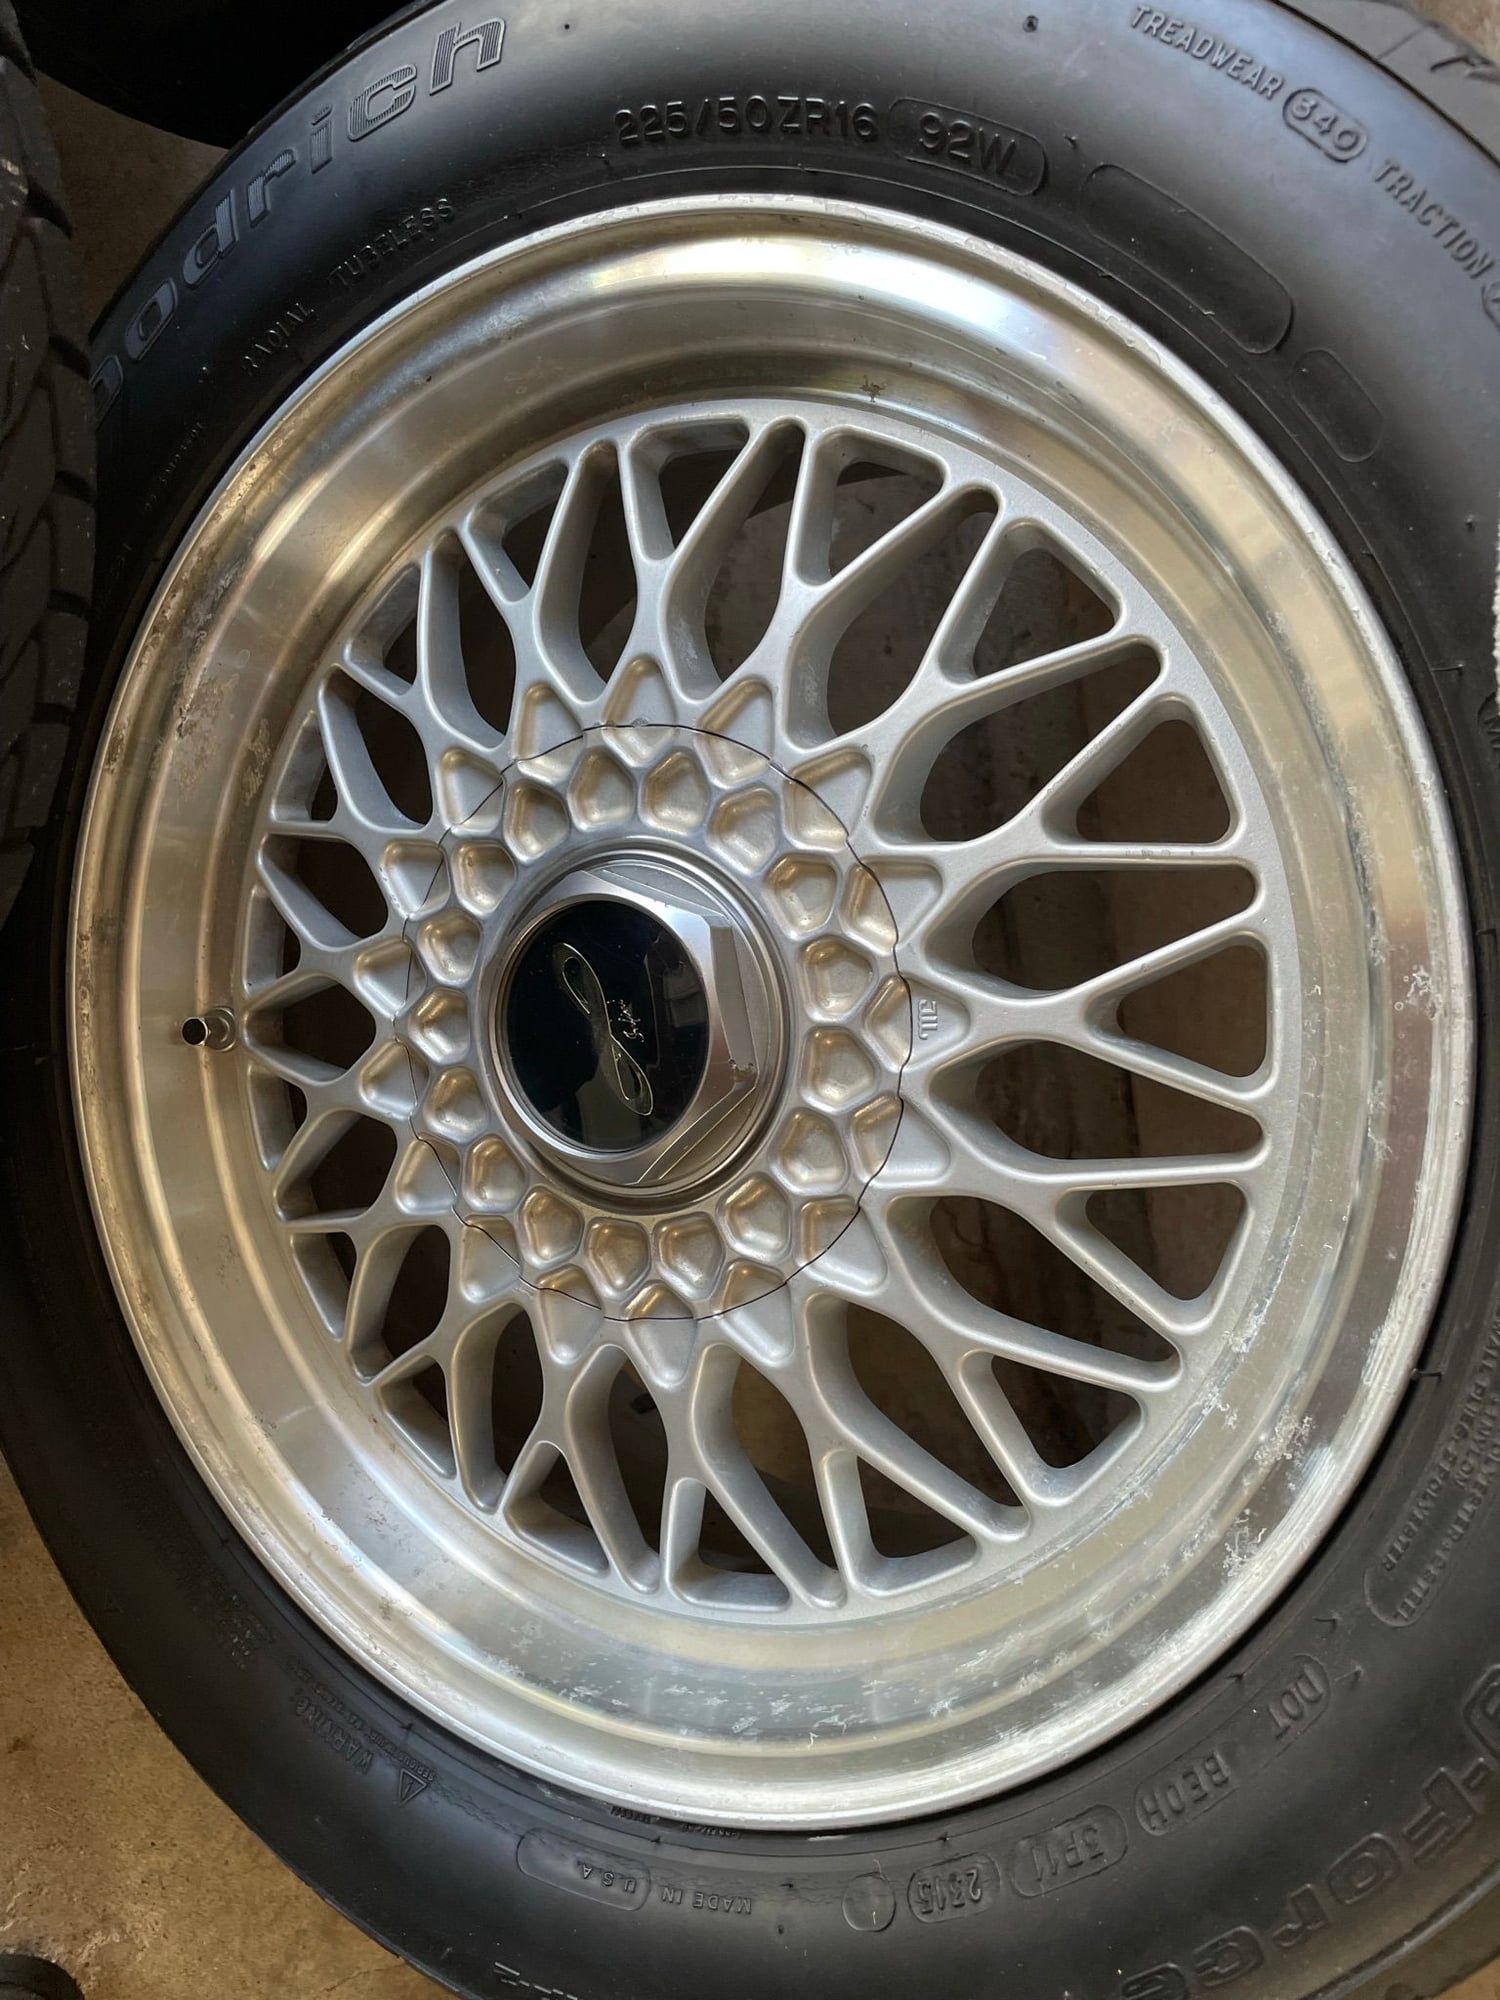 Wheels and Tires/Axles - Infini wheels. - Used - 1986 to 1991 Mazda RX-7 - Saint Louis, MO 63114, United States